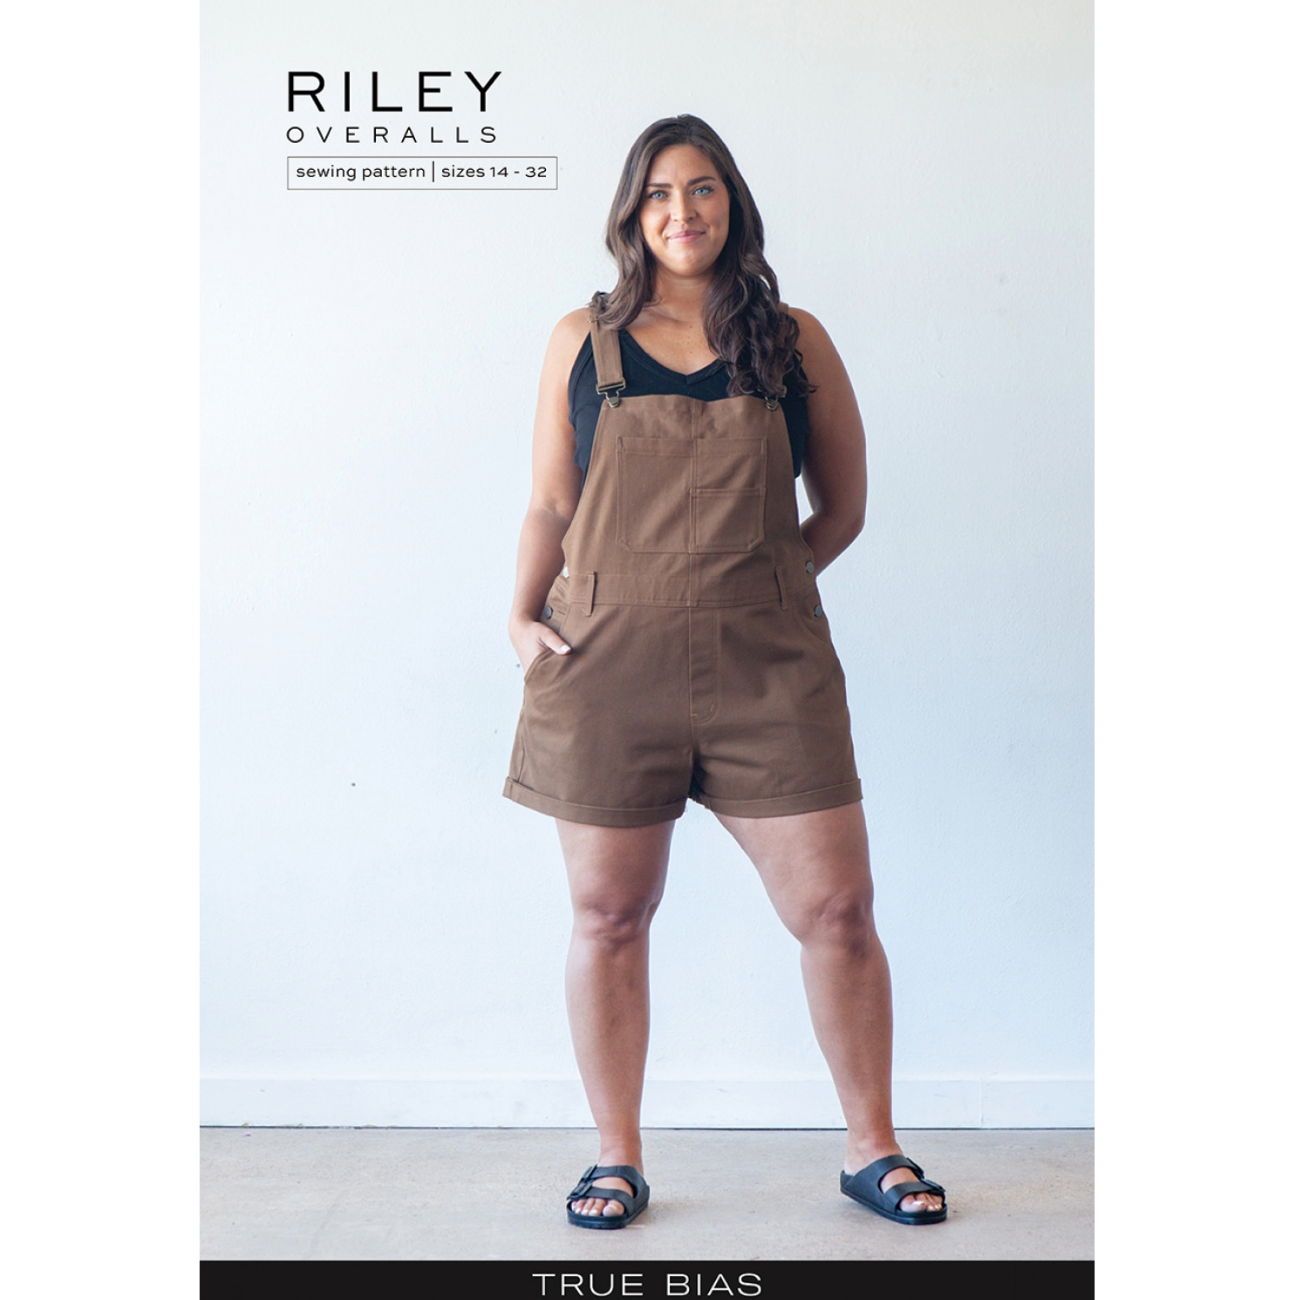 Riley Overalls 14-32 - By True Bias Patterns